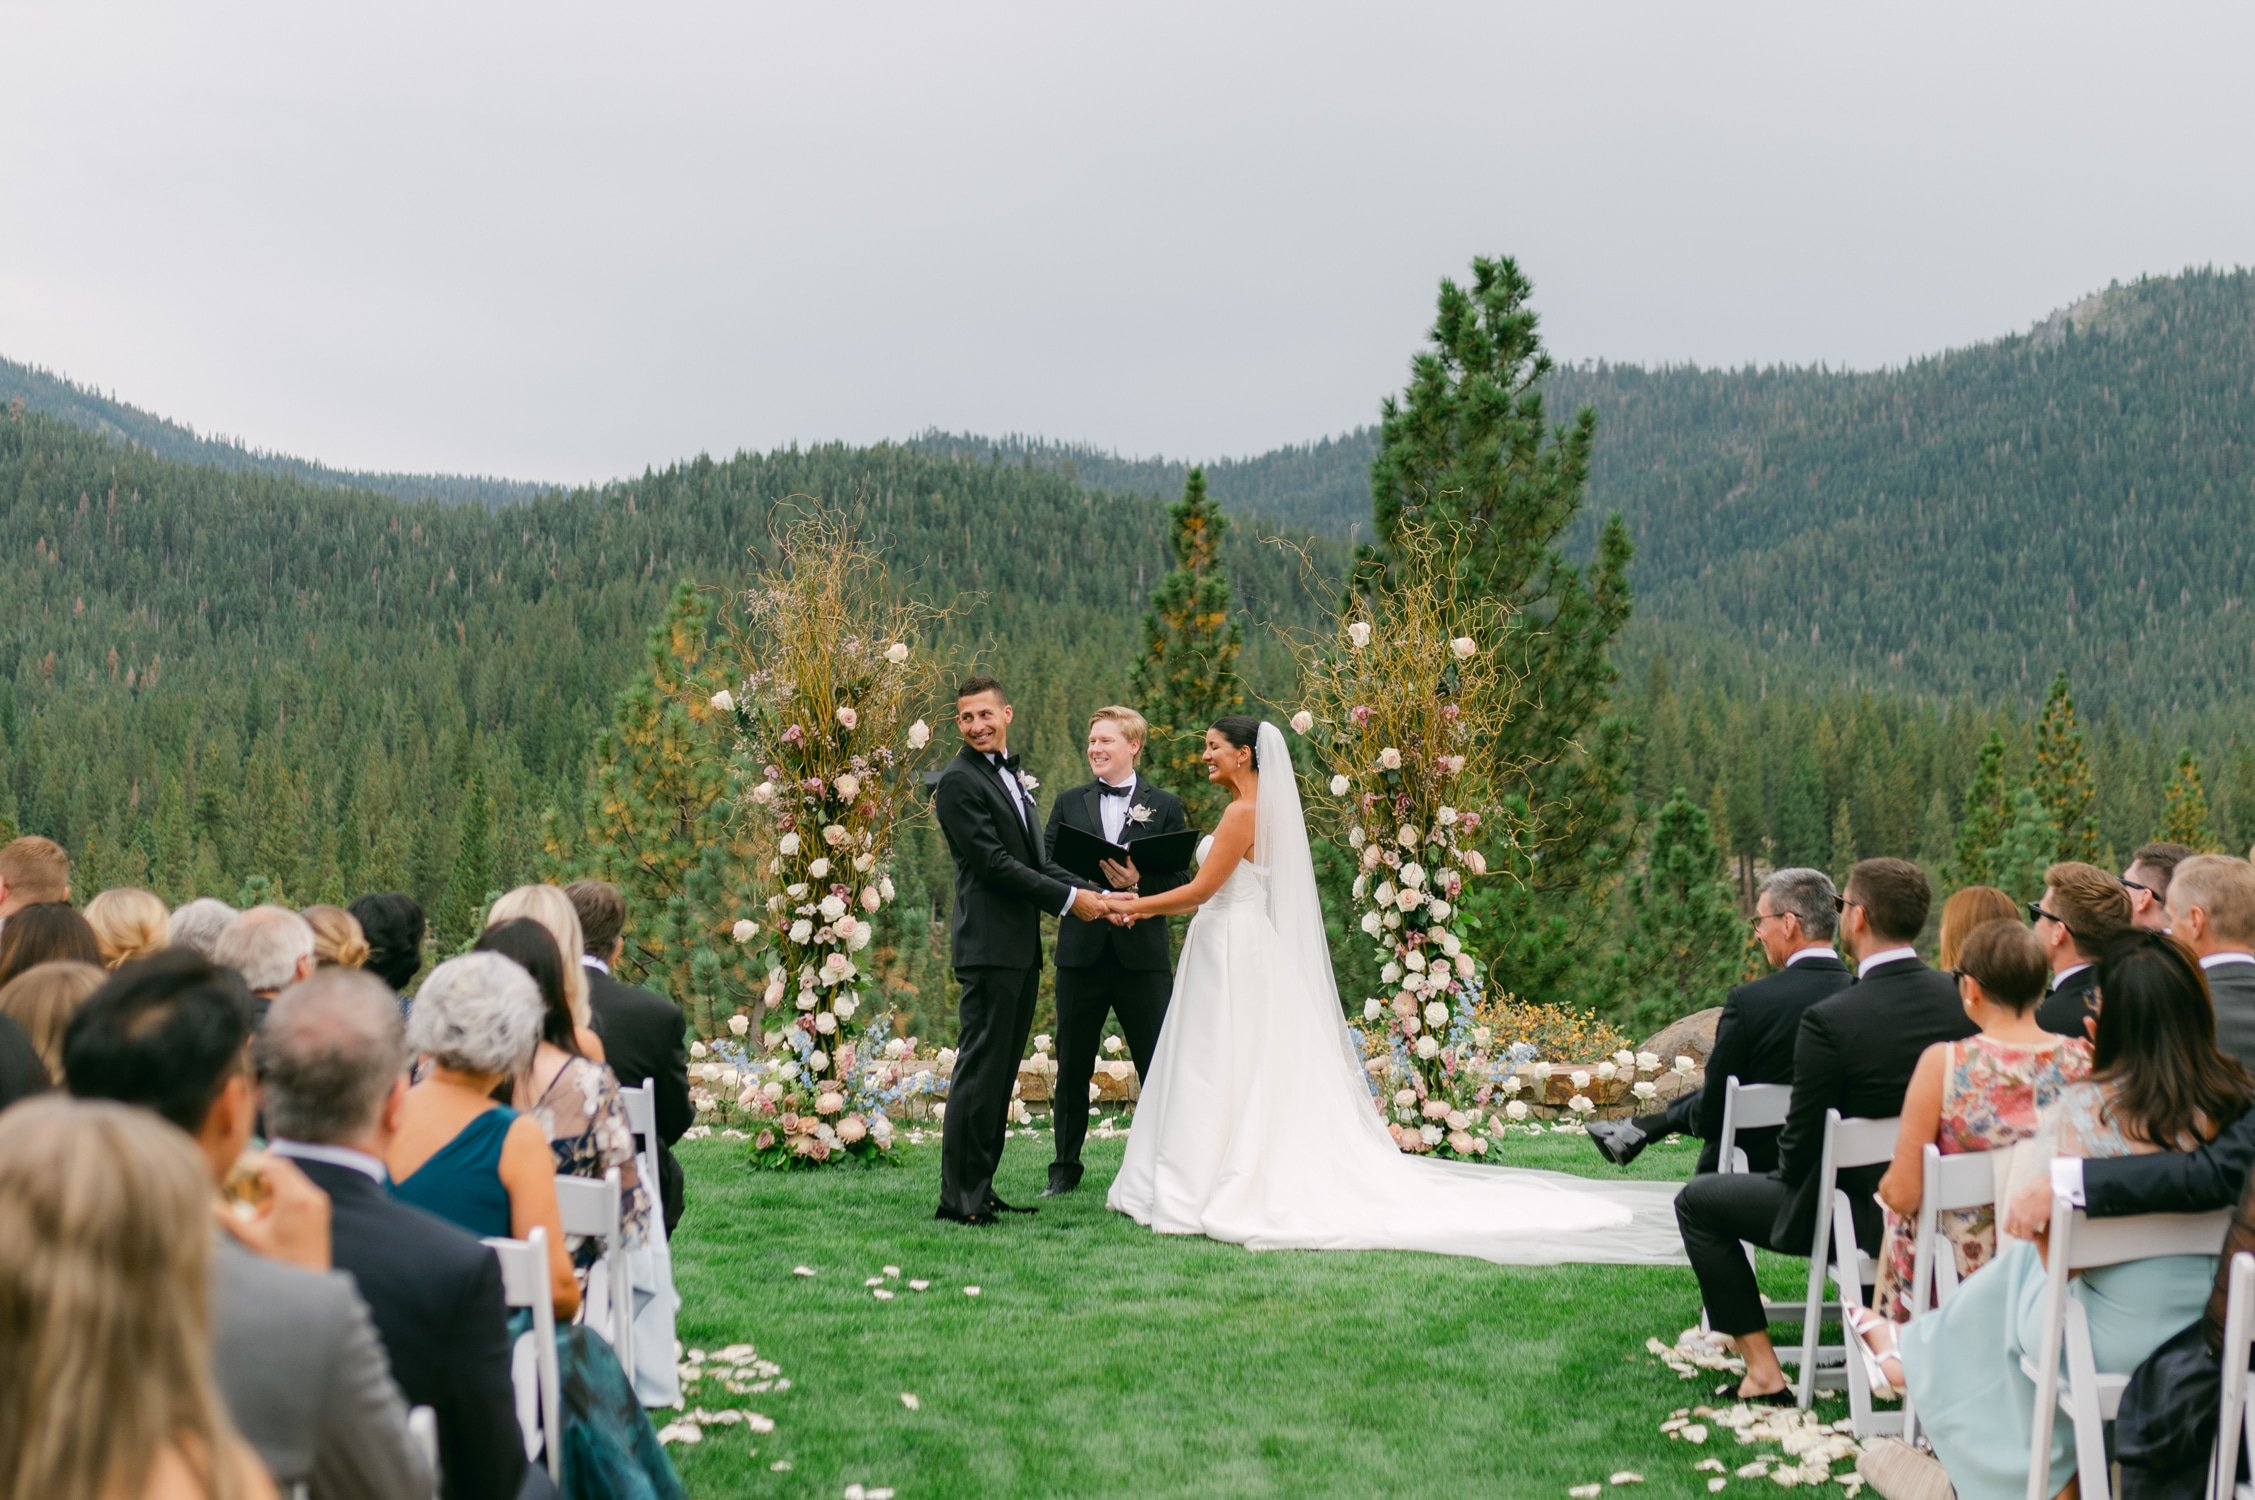 Martis Camp Wedding, photo of the wedding couple holding hands during their outdoor ceremony looking at their guests